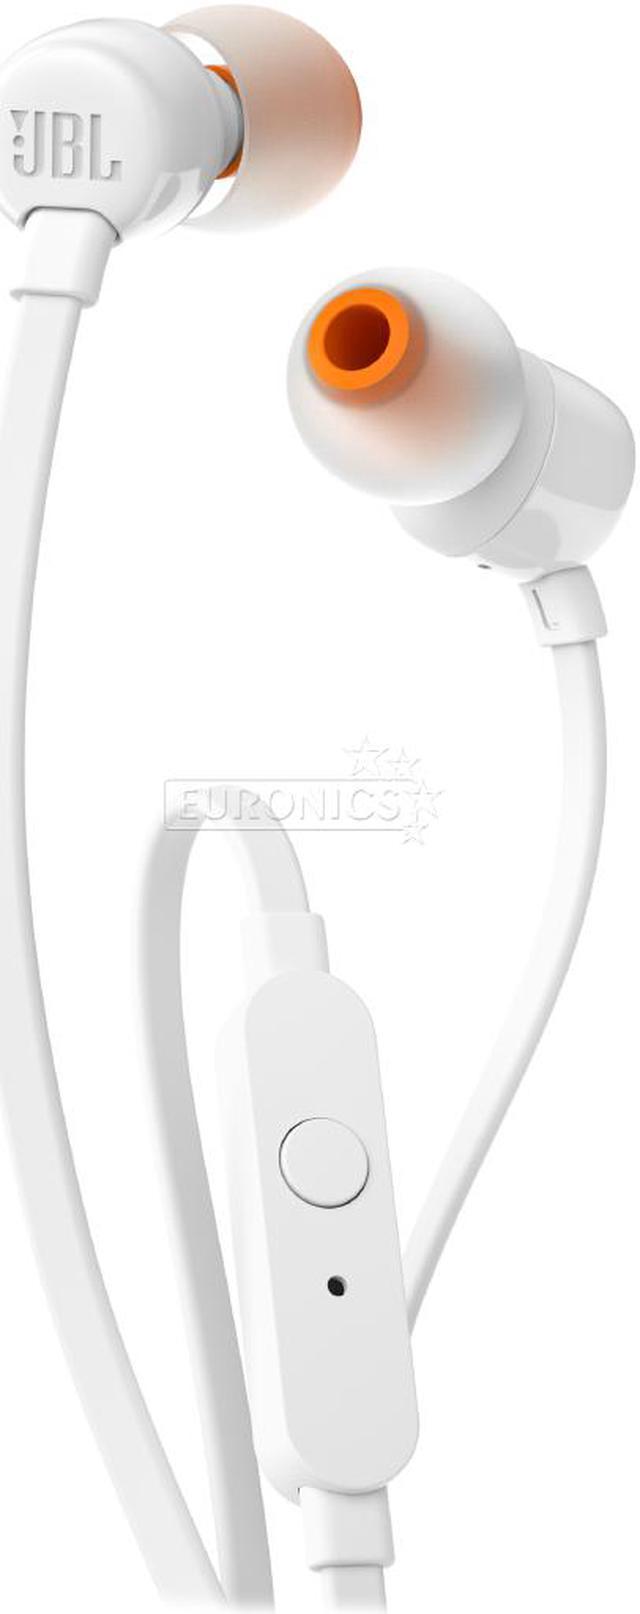 Buy JBL T110 Wired In-Ear Headphones with JBL Pure Bass Sound: In-Ear  Headphones Deals